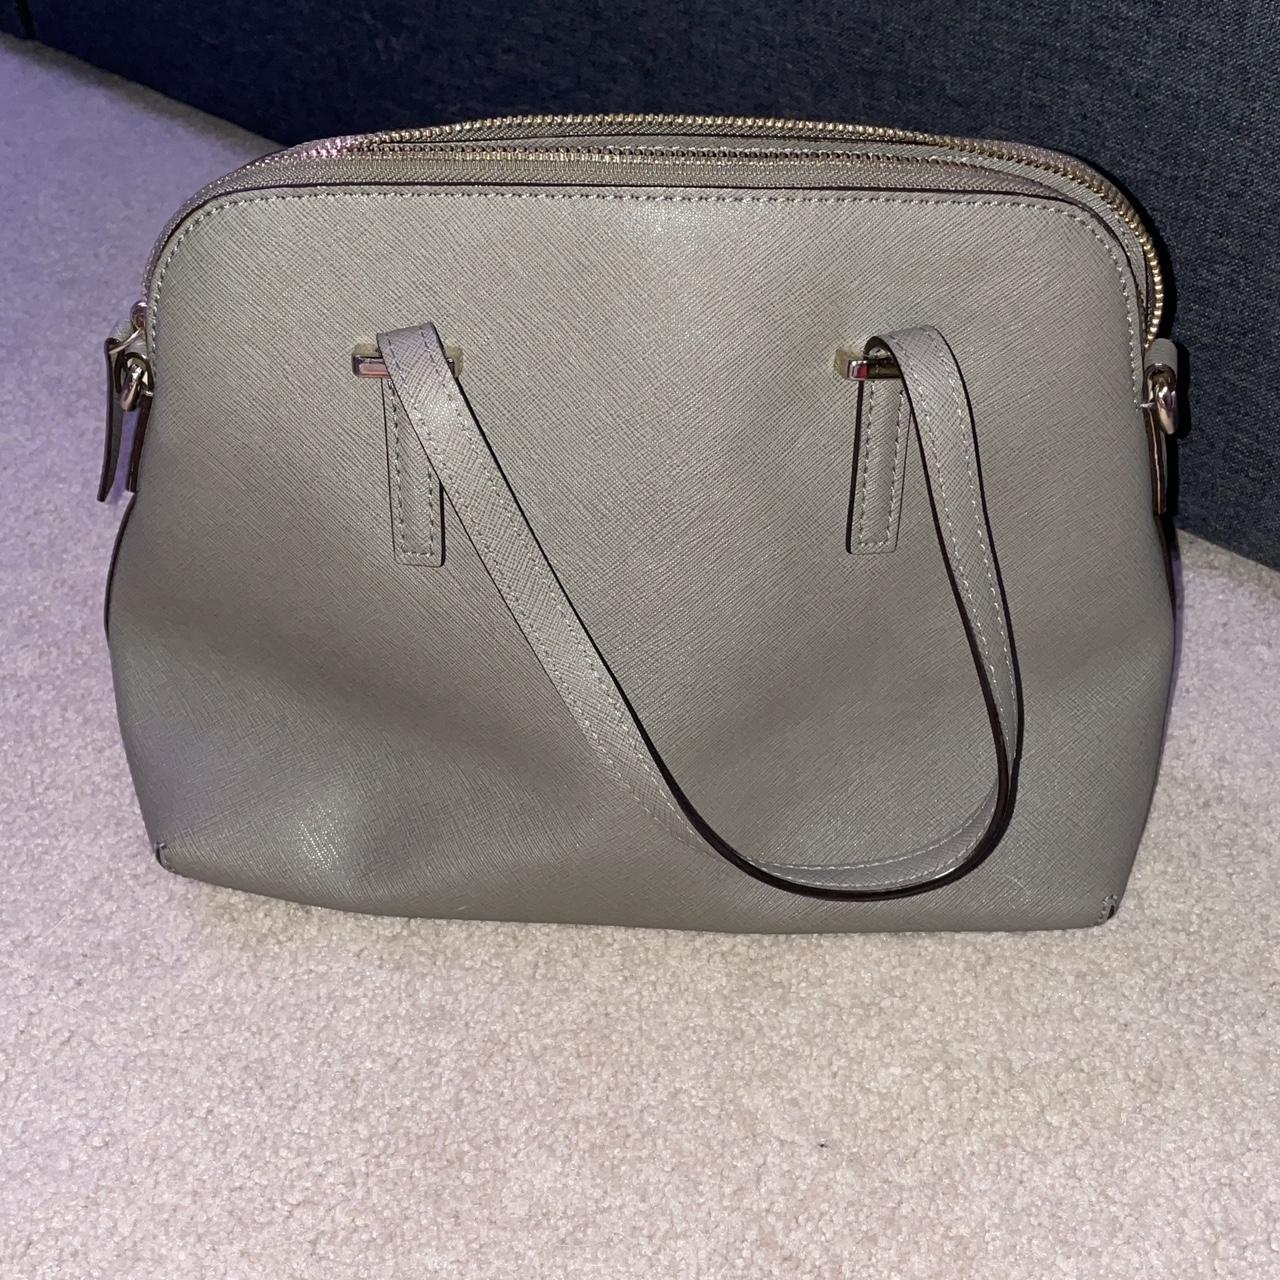 Kate Spade New York  Women's Grey and Silver Bag (2)